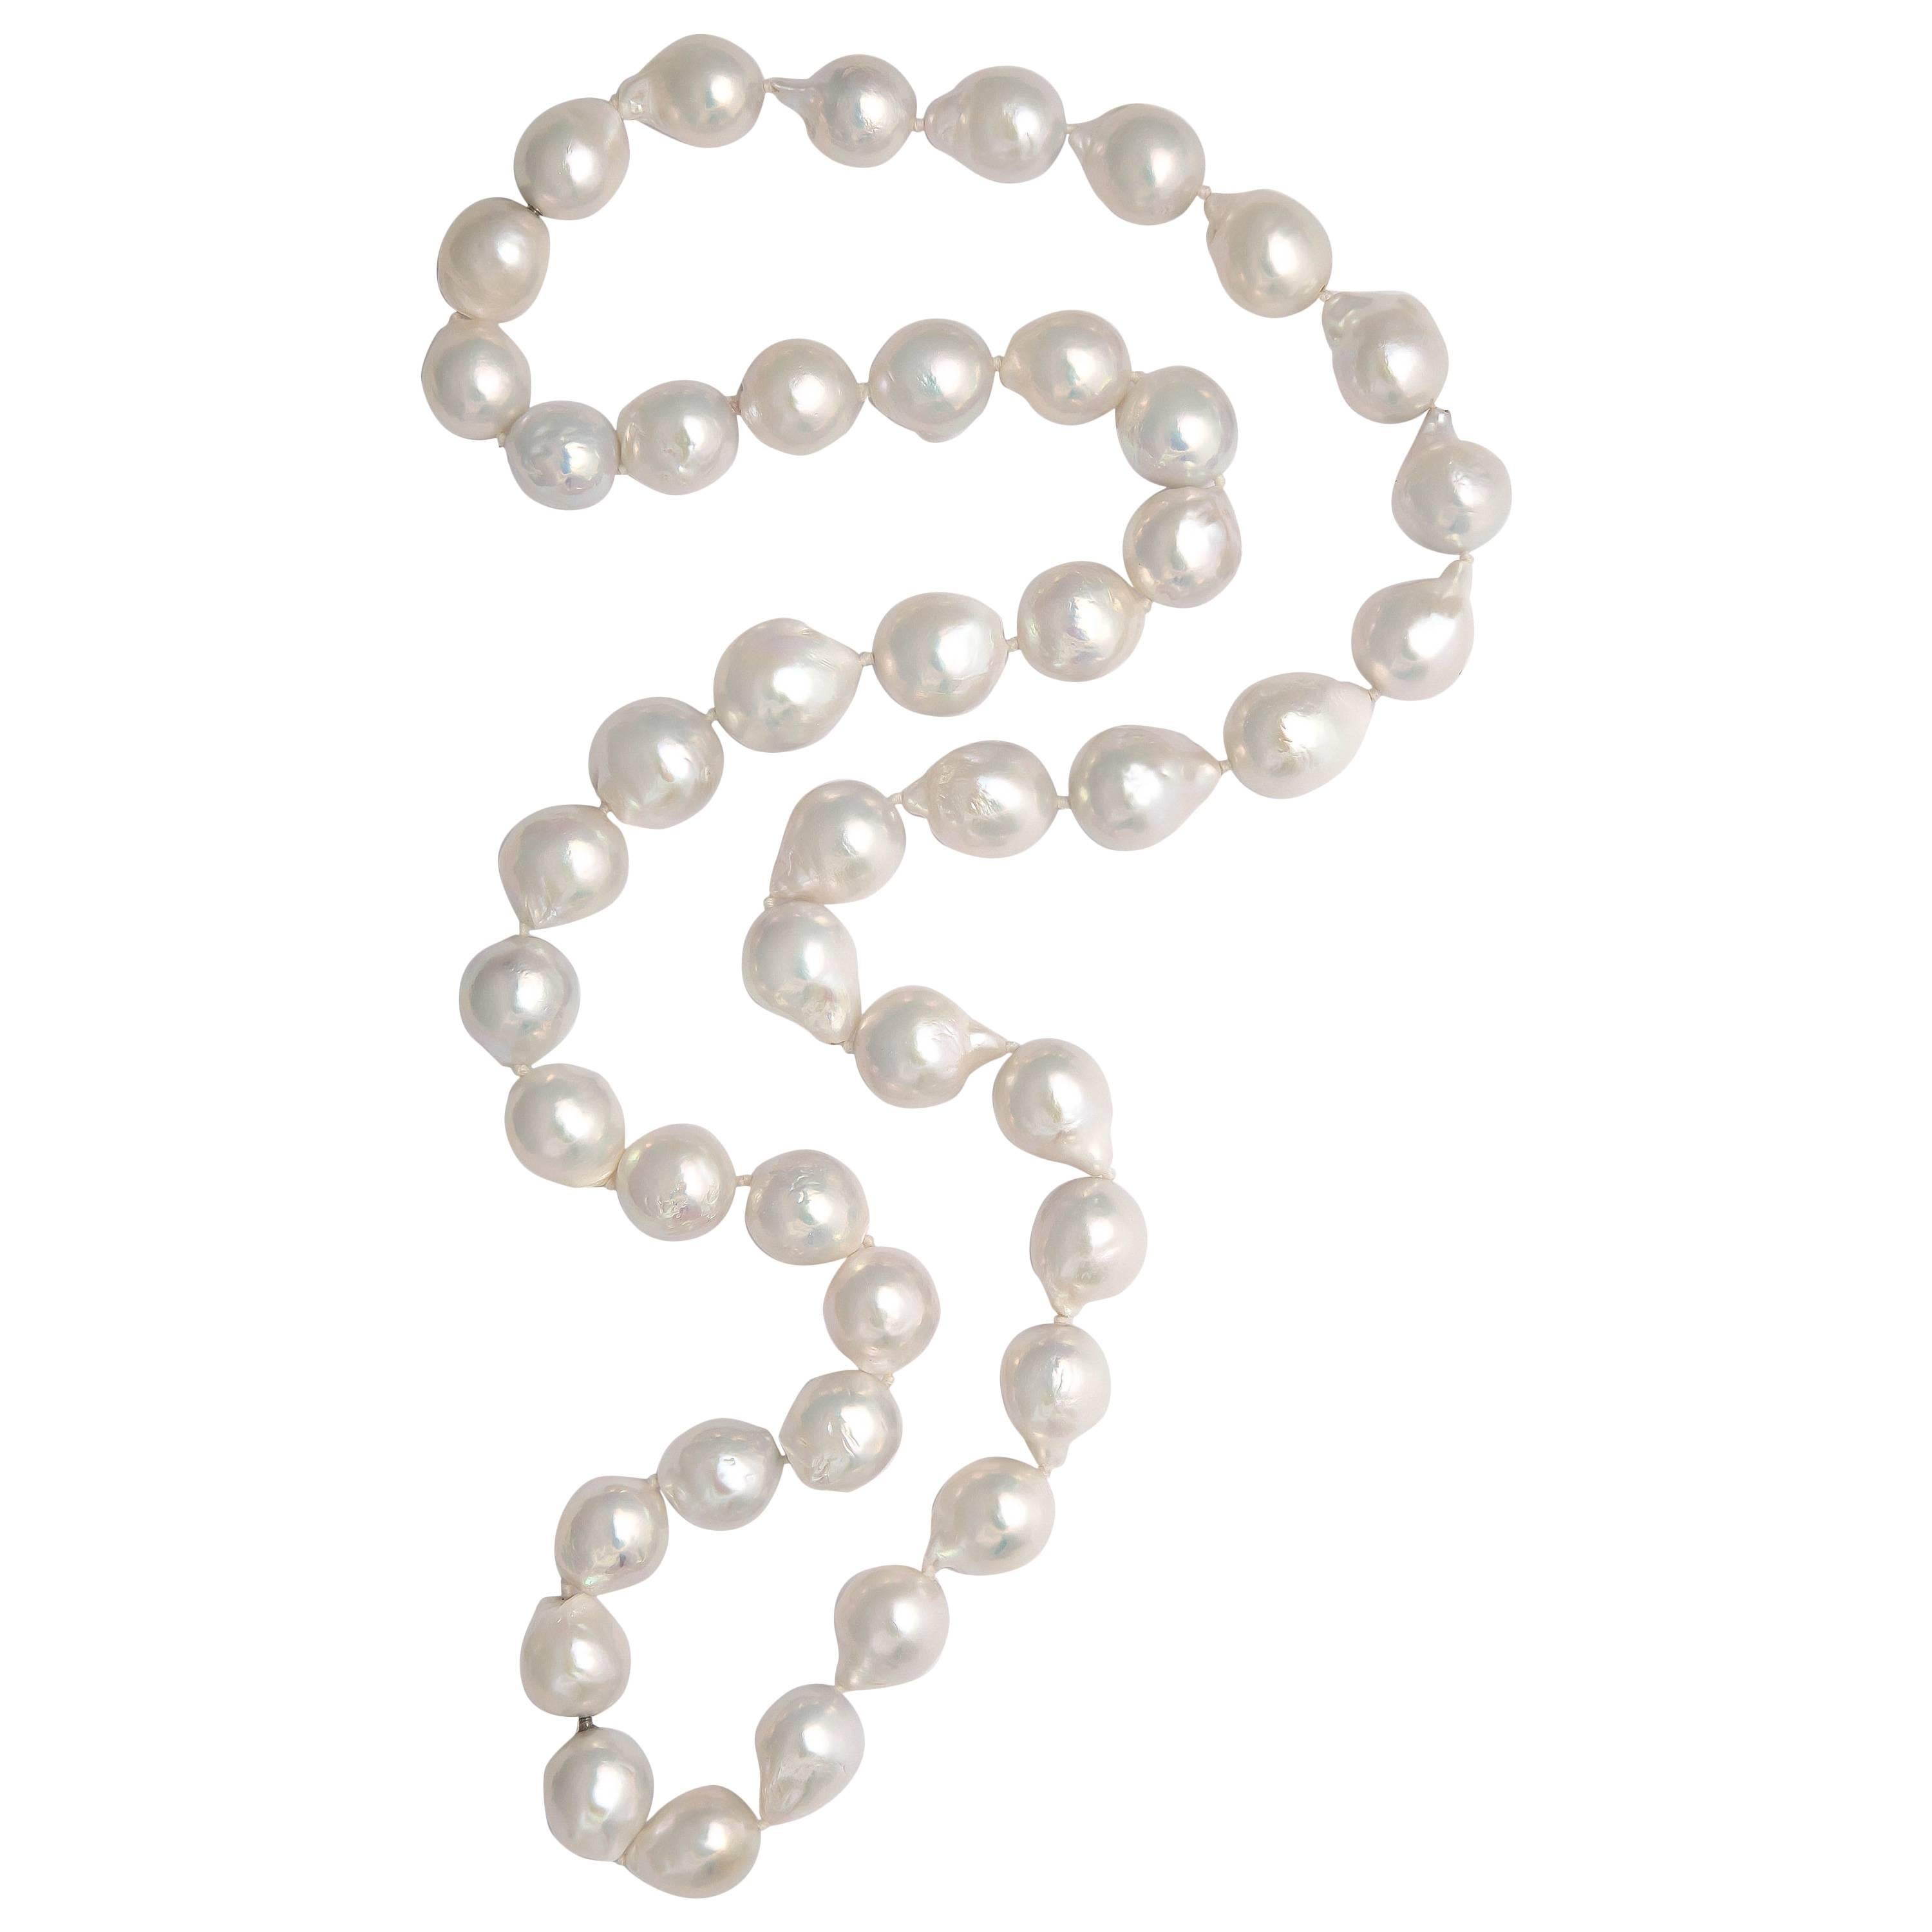 Two Strands of White Freshwater Baroque Pearls For Sale